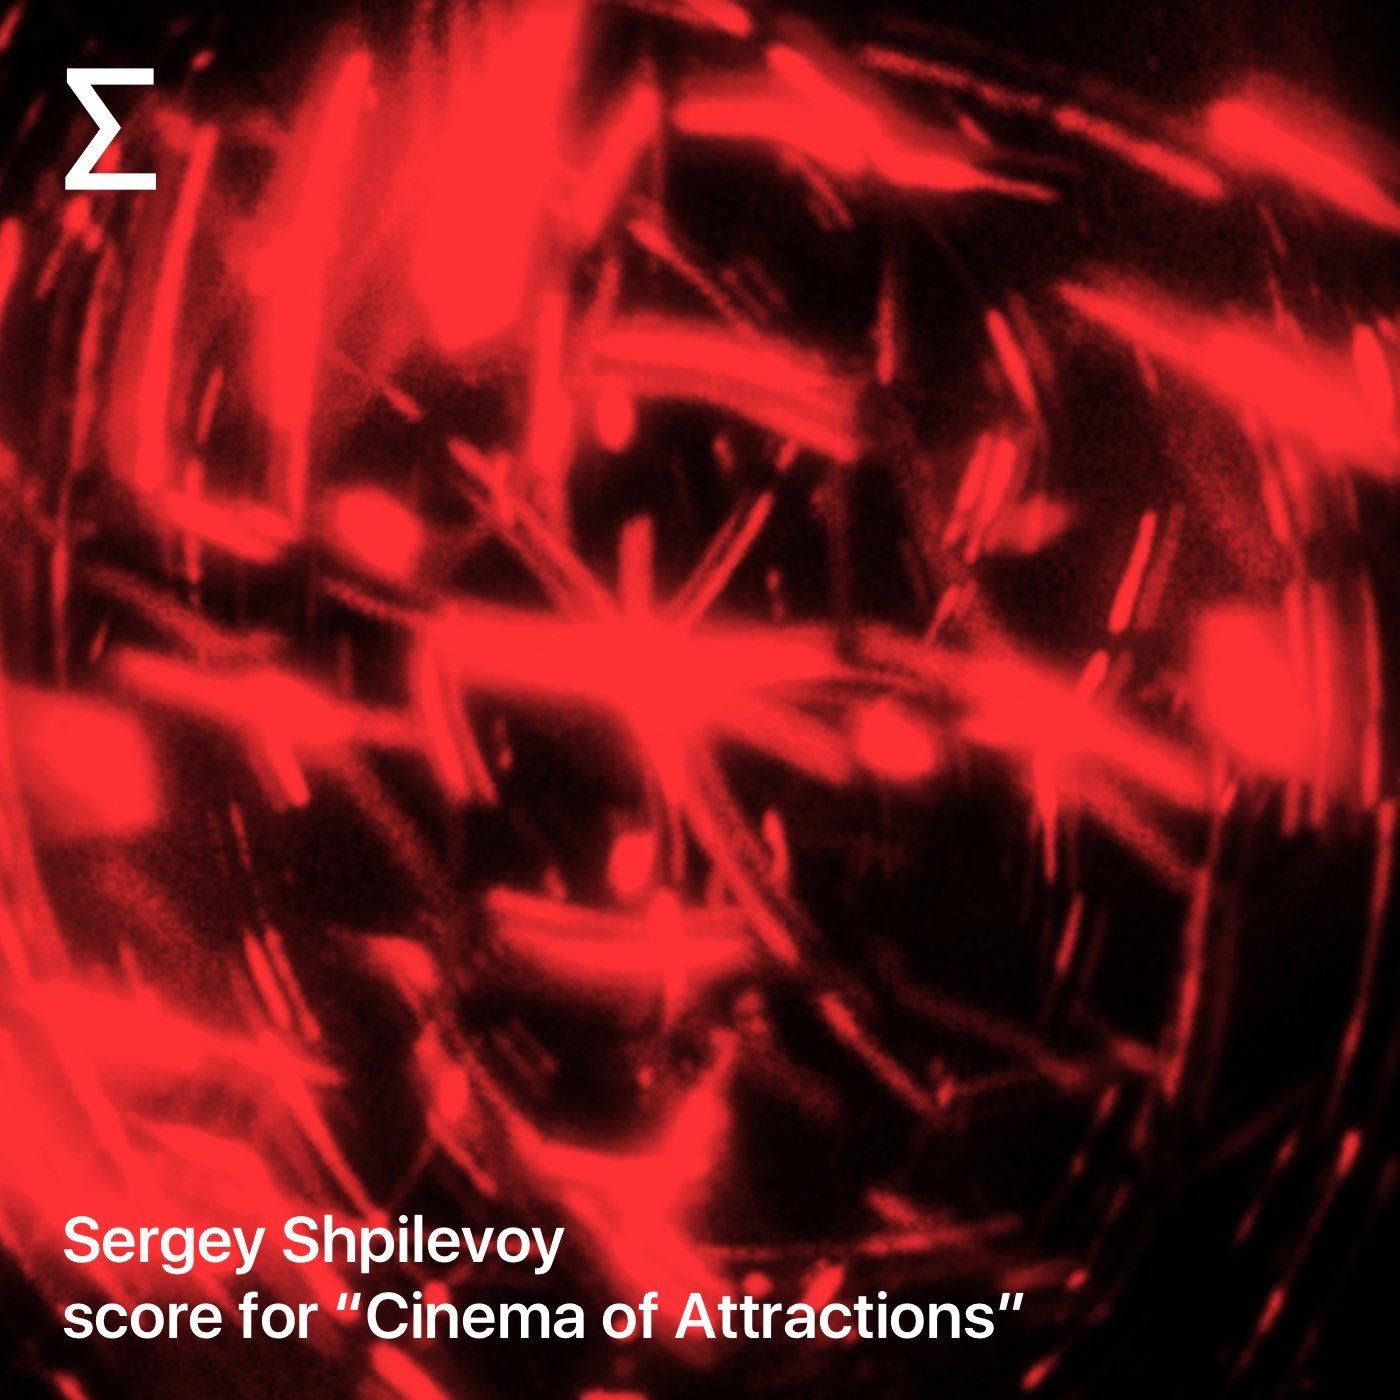 Sergey Shpilevoy – score for “Cinema of Attractions”